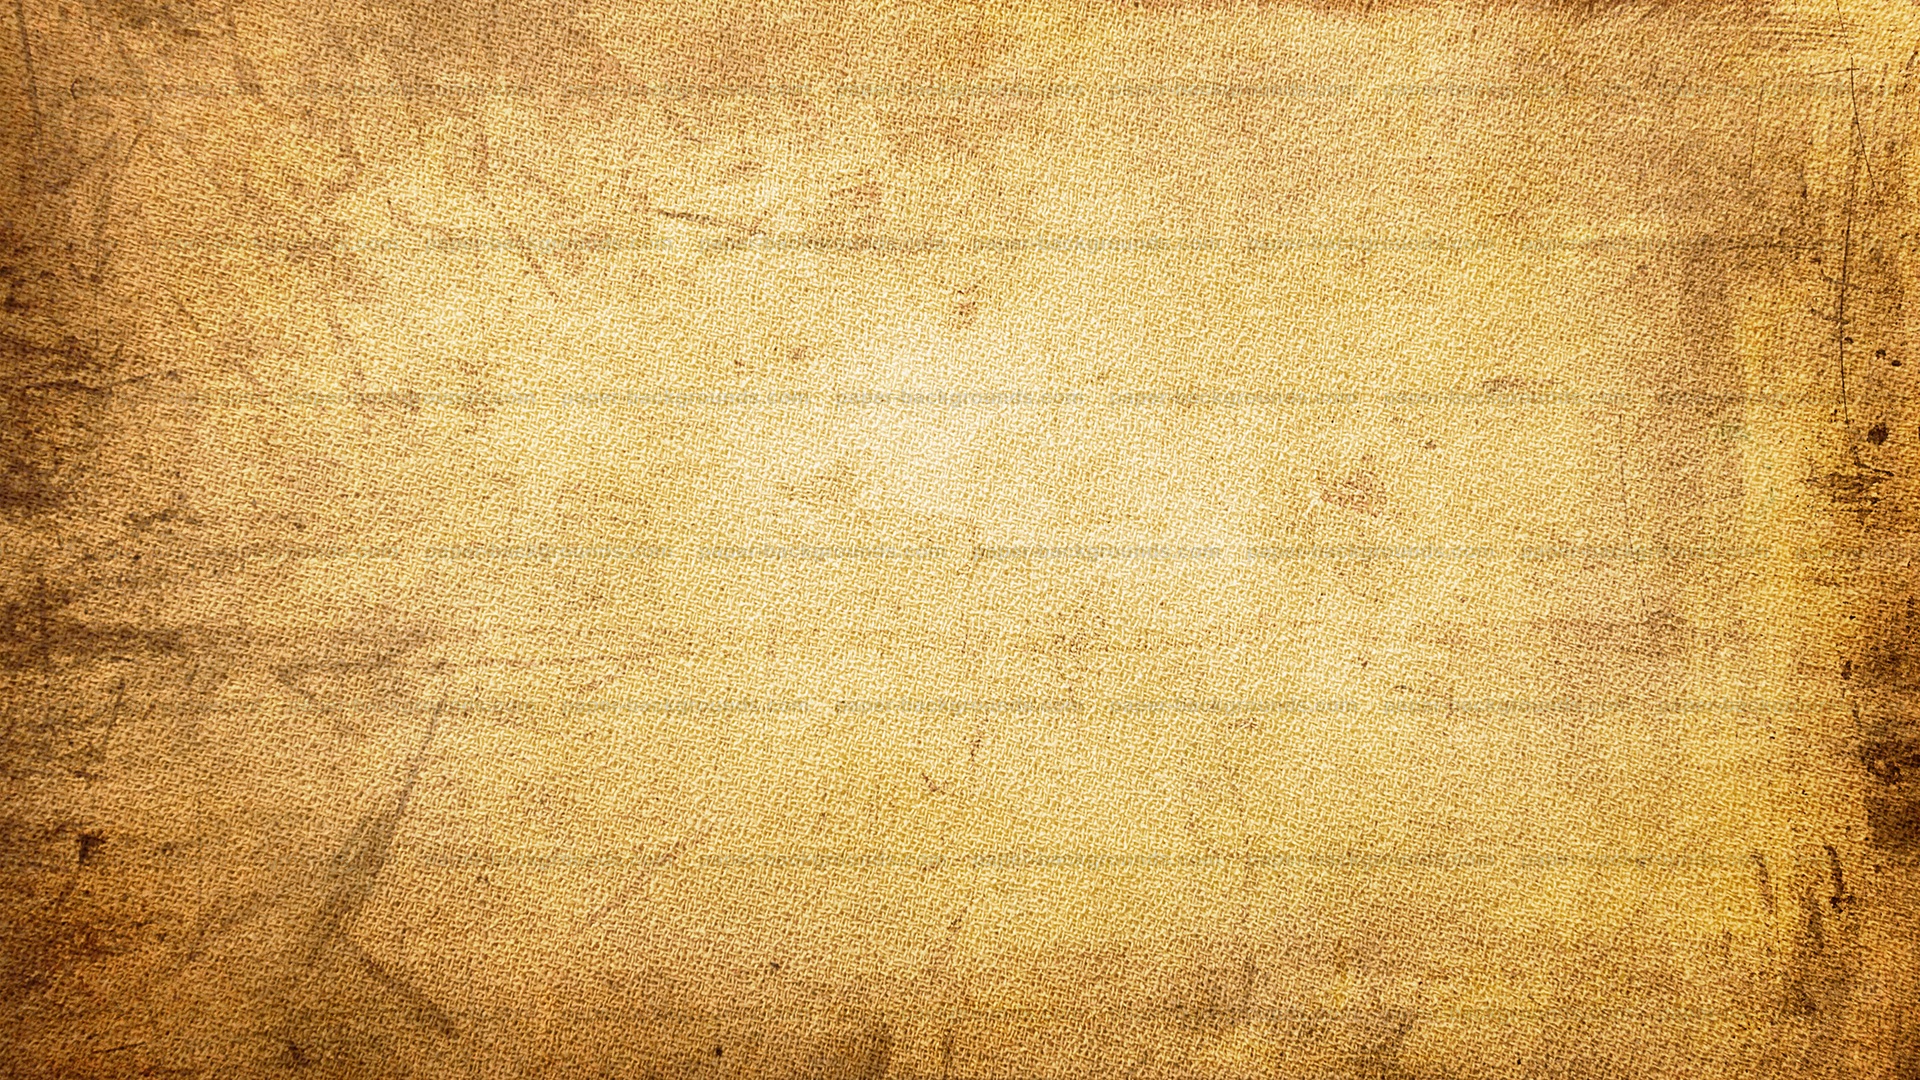 Yellow Vintage Fabric Texture Background HD Paper Backgrounds